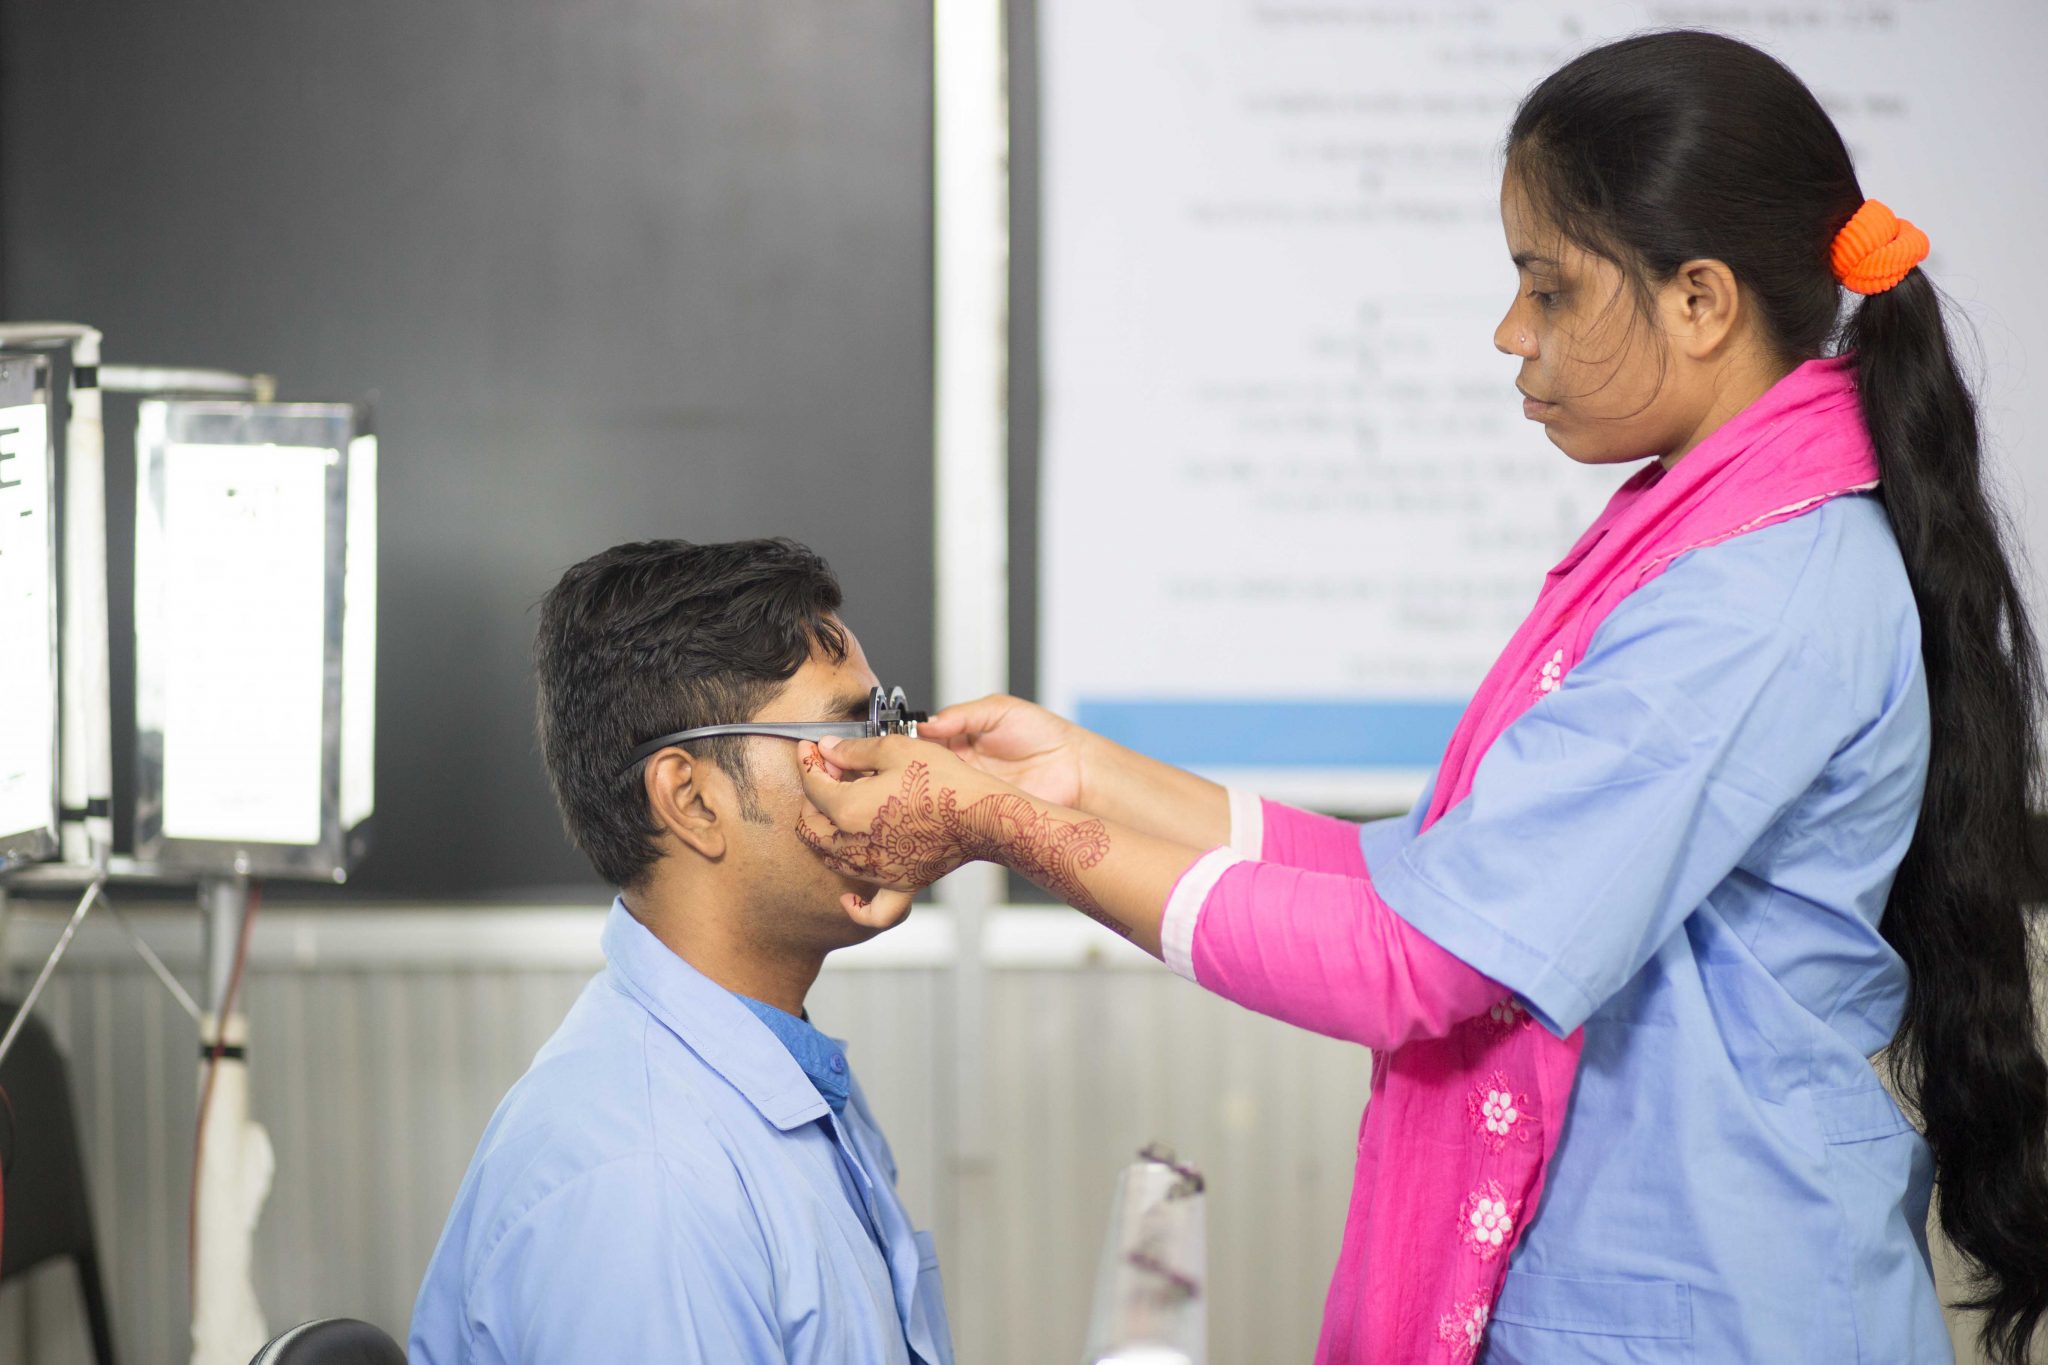 Promoting affordable vision correction services to rural populations in Bangladesh